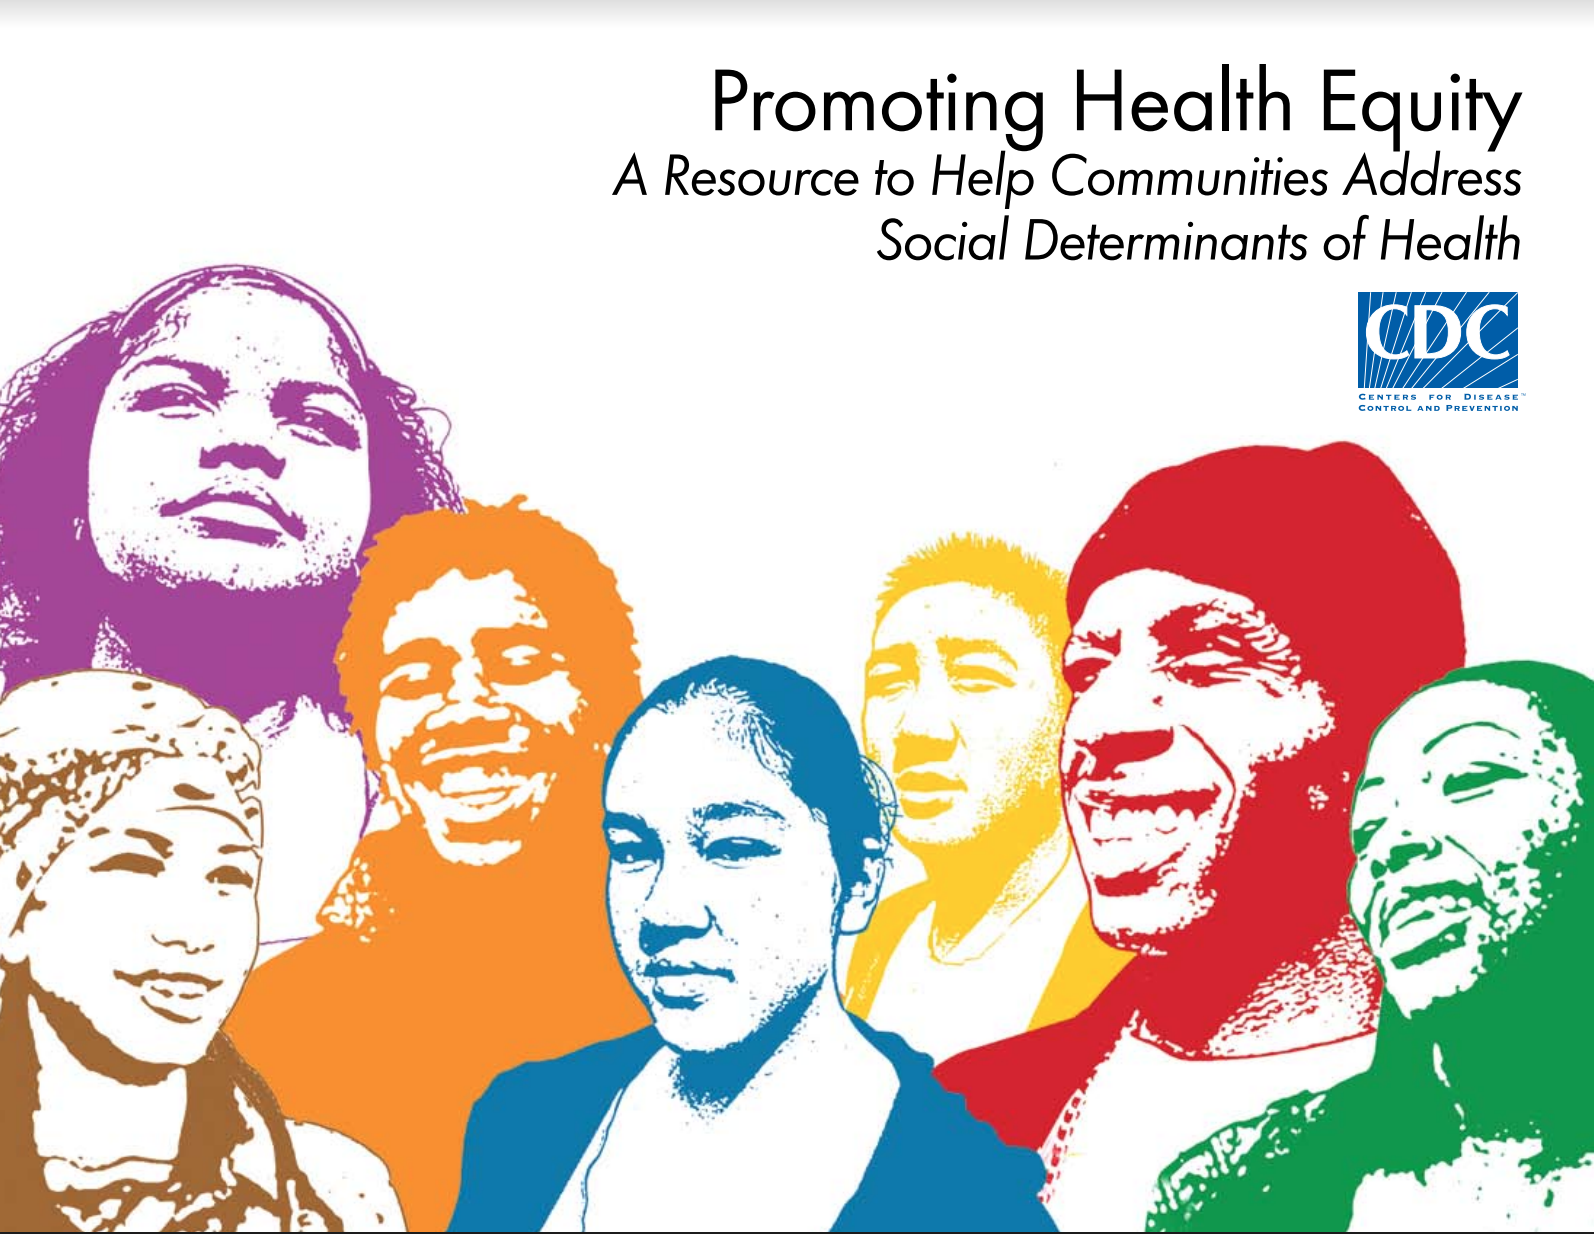 Promoting Health Equity - CDC